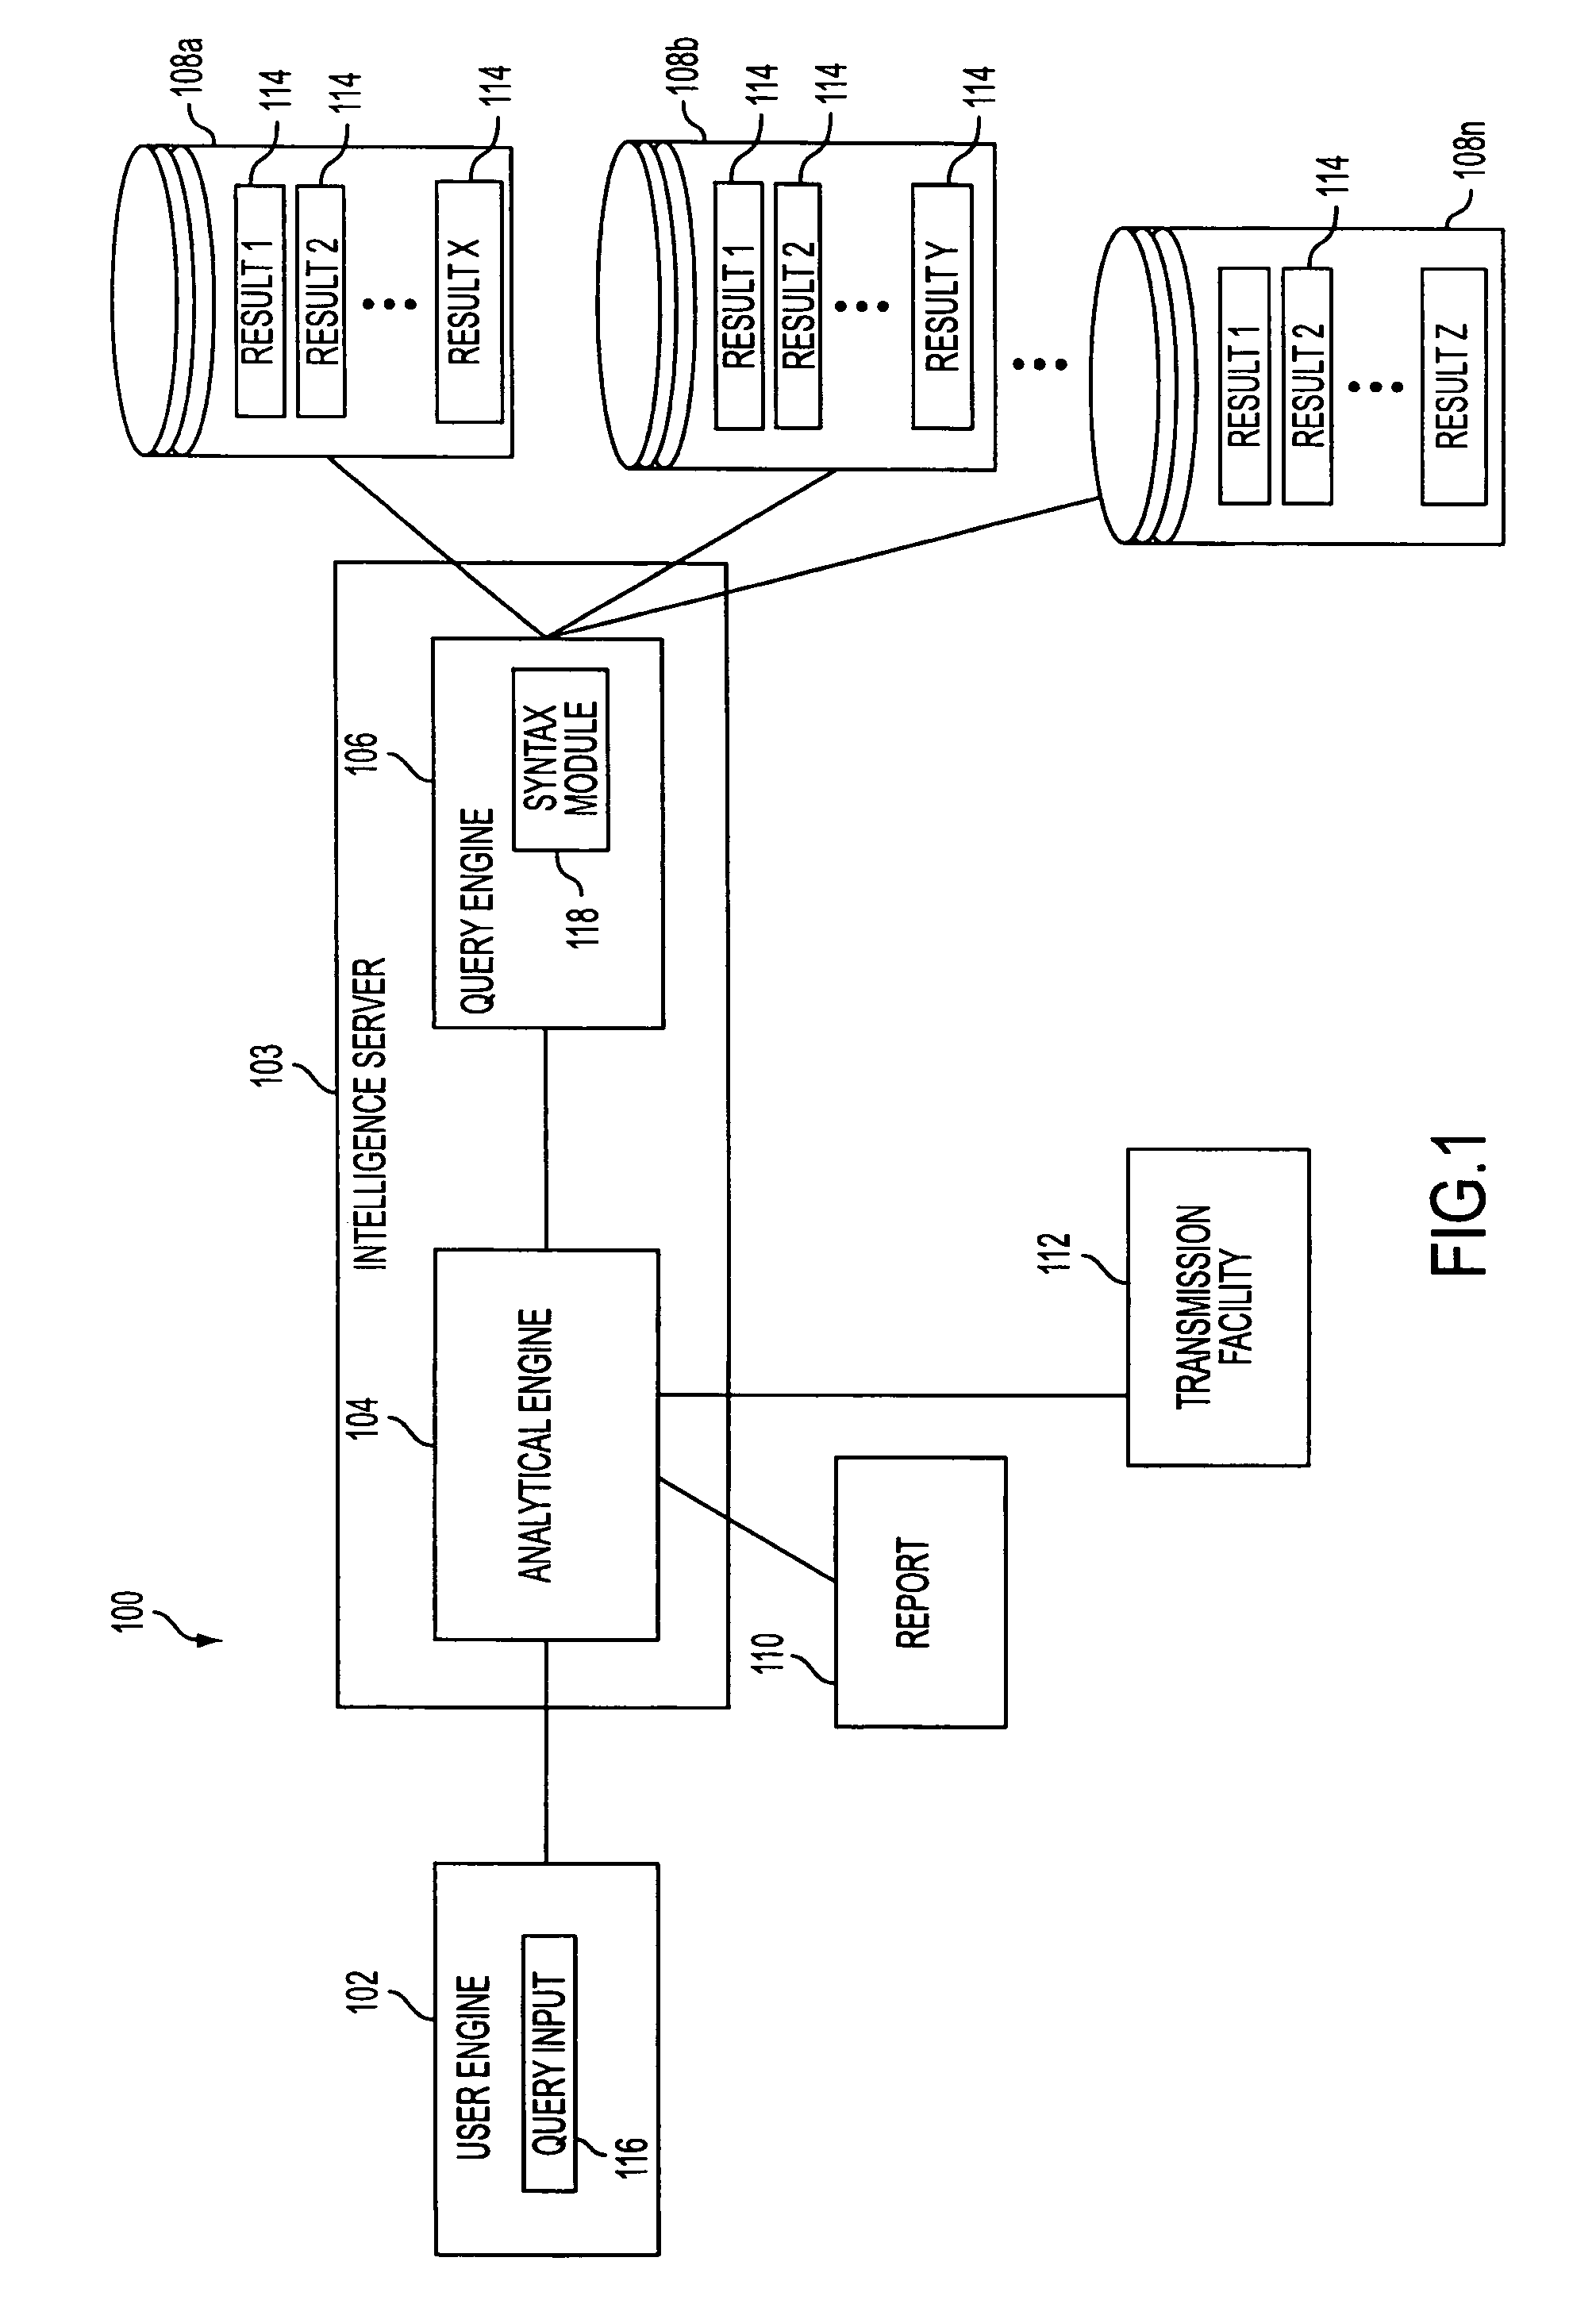 System and method for analyzing statistics in a reporting system